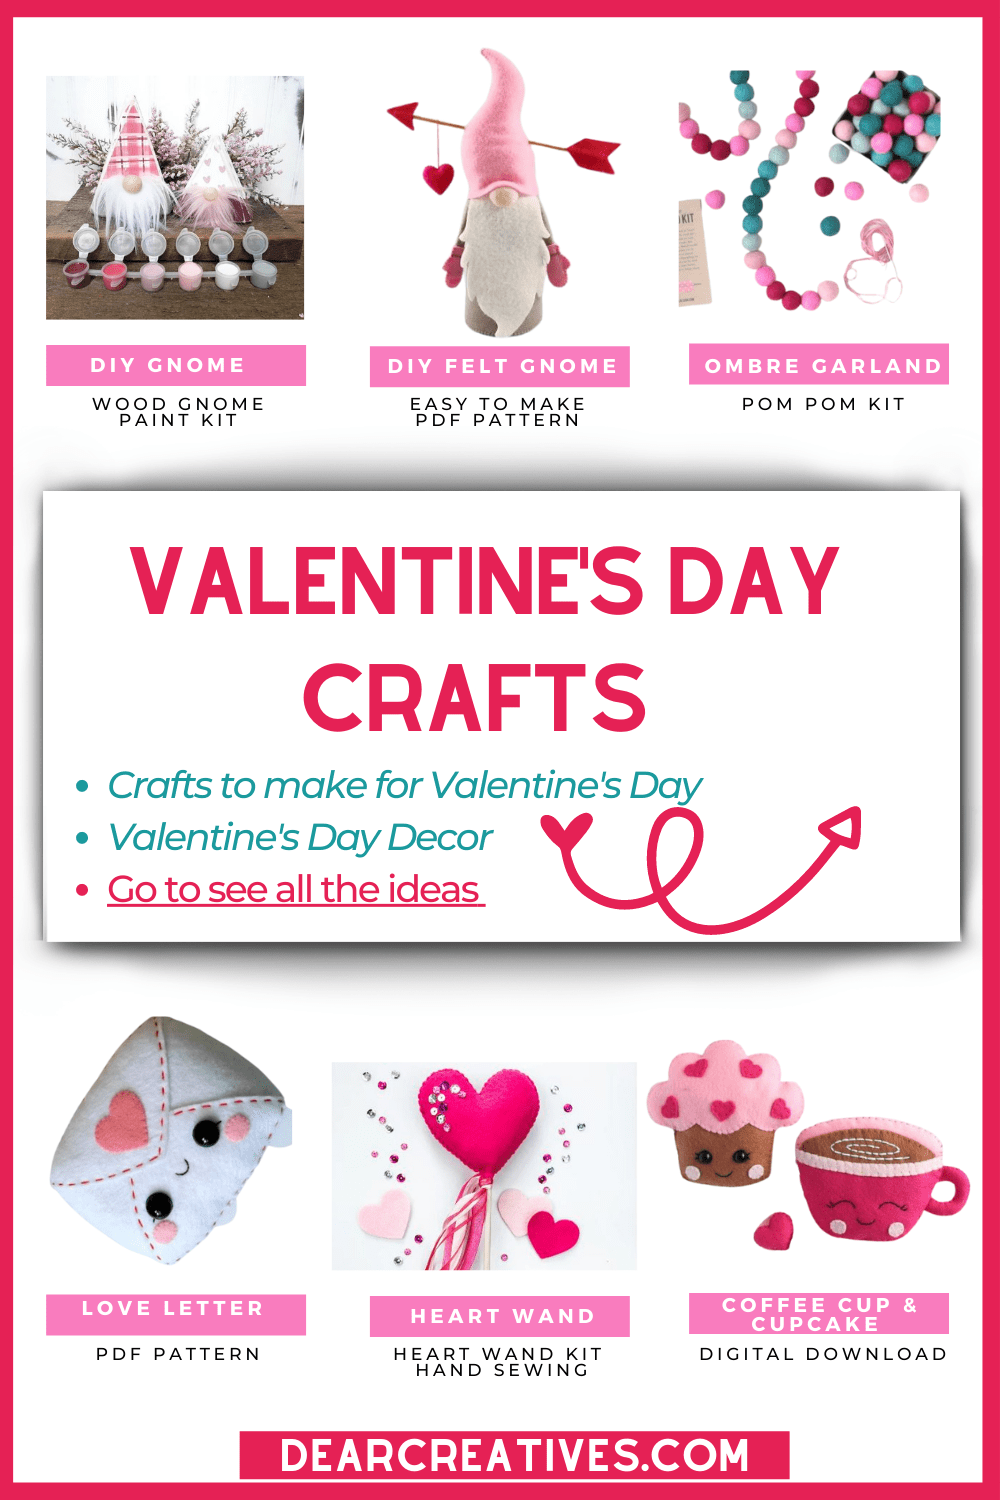 Valentine's Day Felt Crafts and Crafts To Make For Valentine's Day - PDF patterns, kits, garlands, ornaments, decor... DearCreatives.com